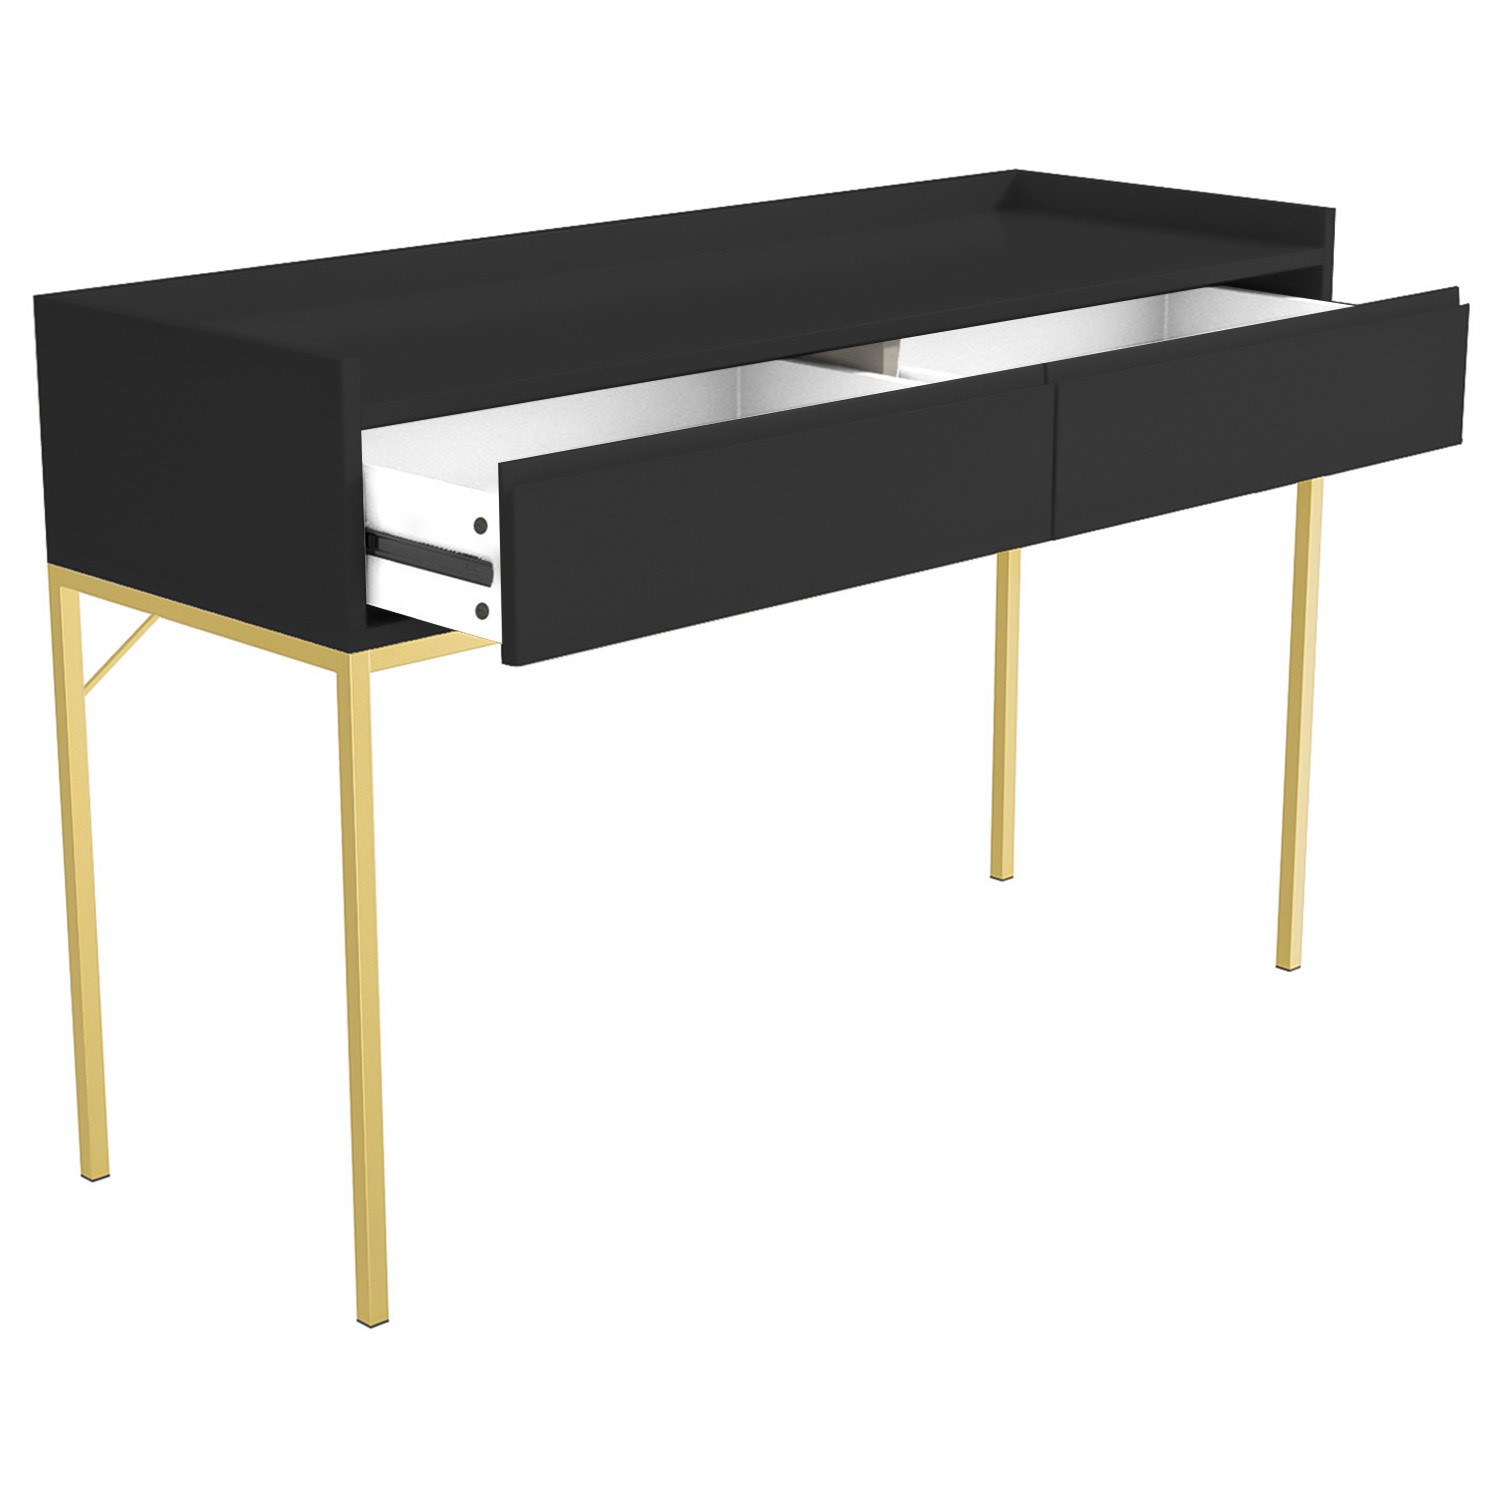 Read more about Black dressing table with 2 drawers and gold legs